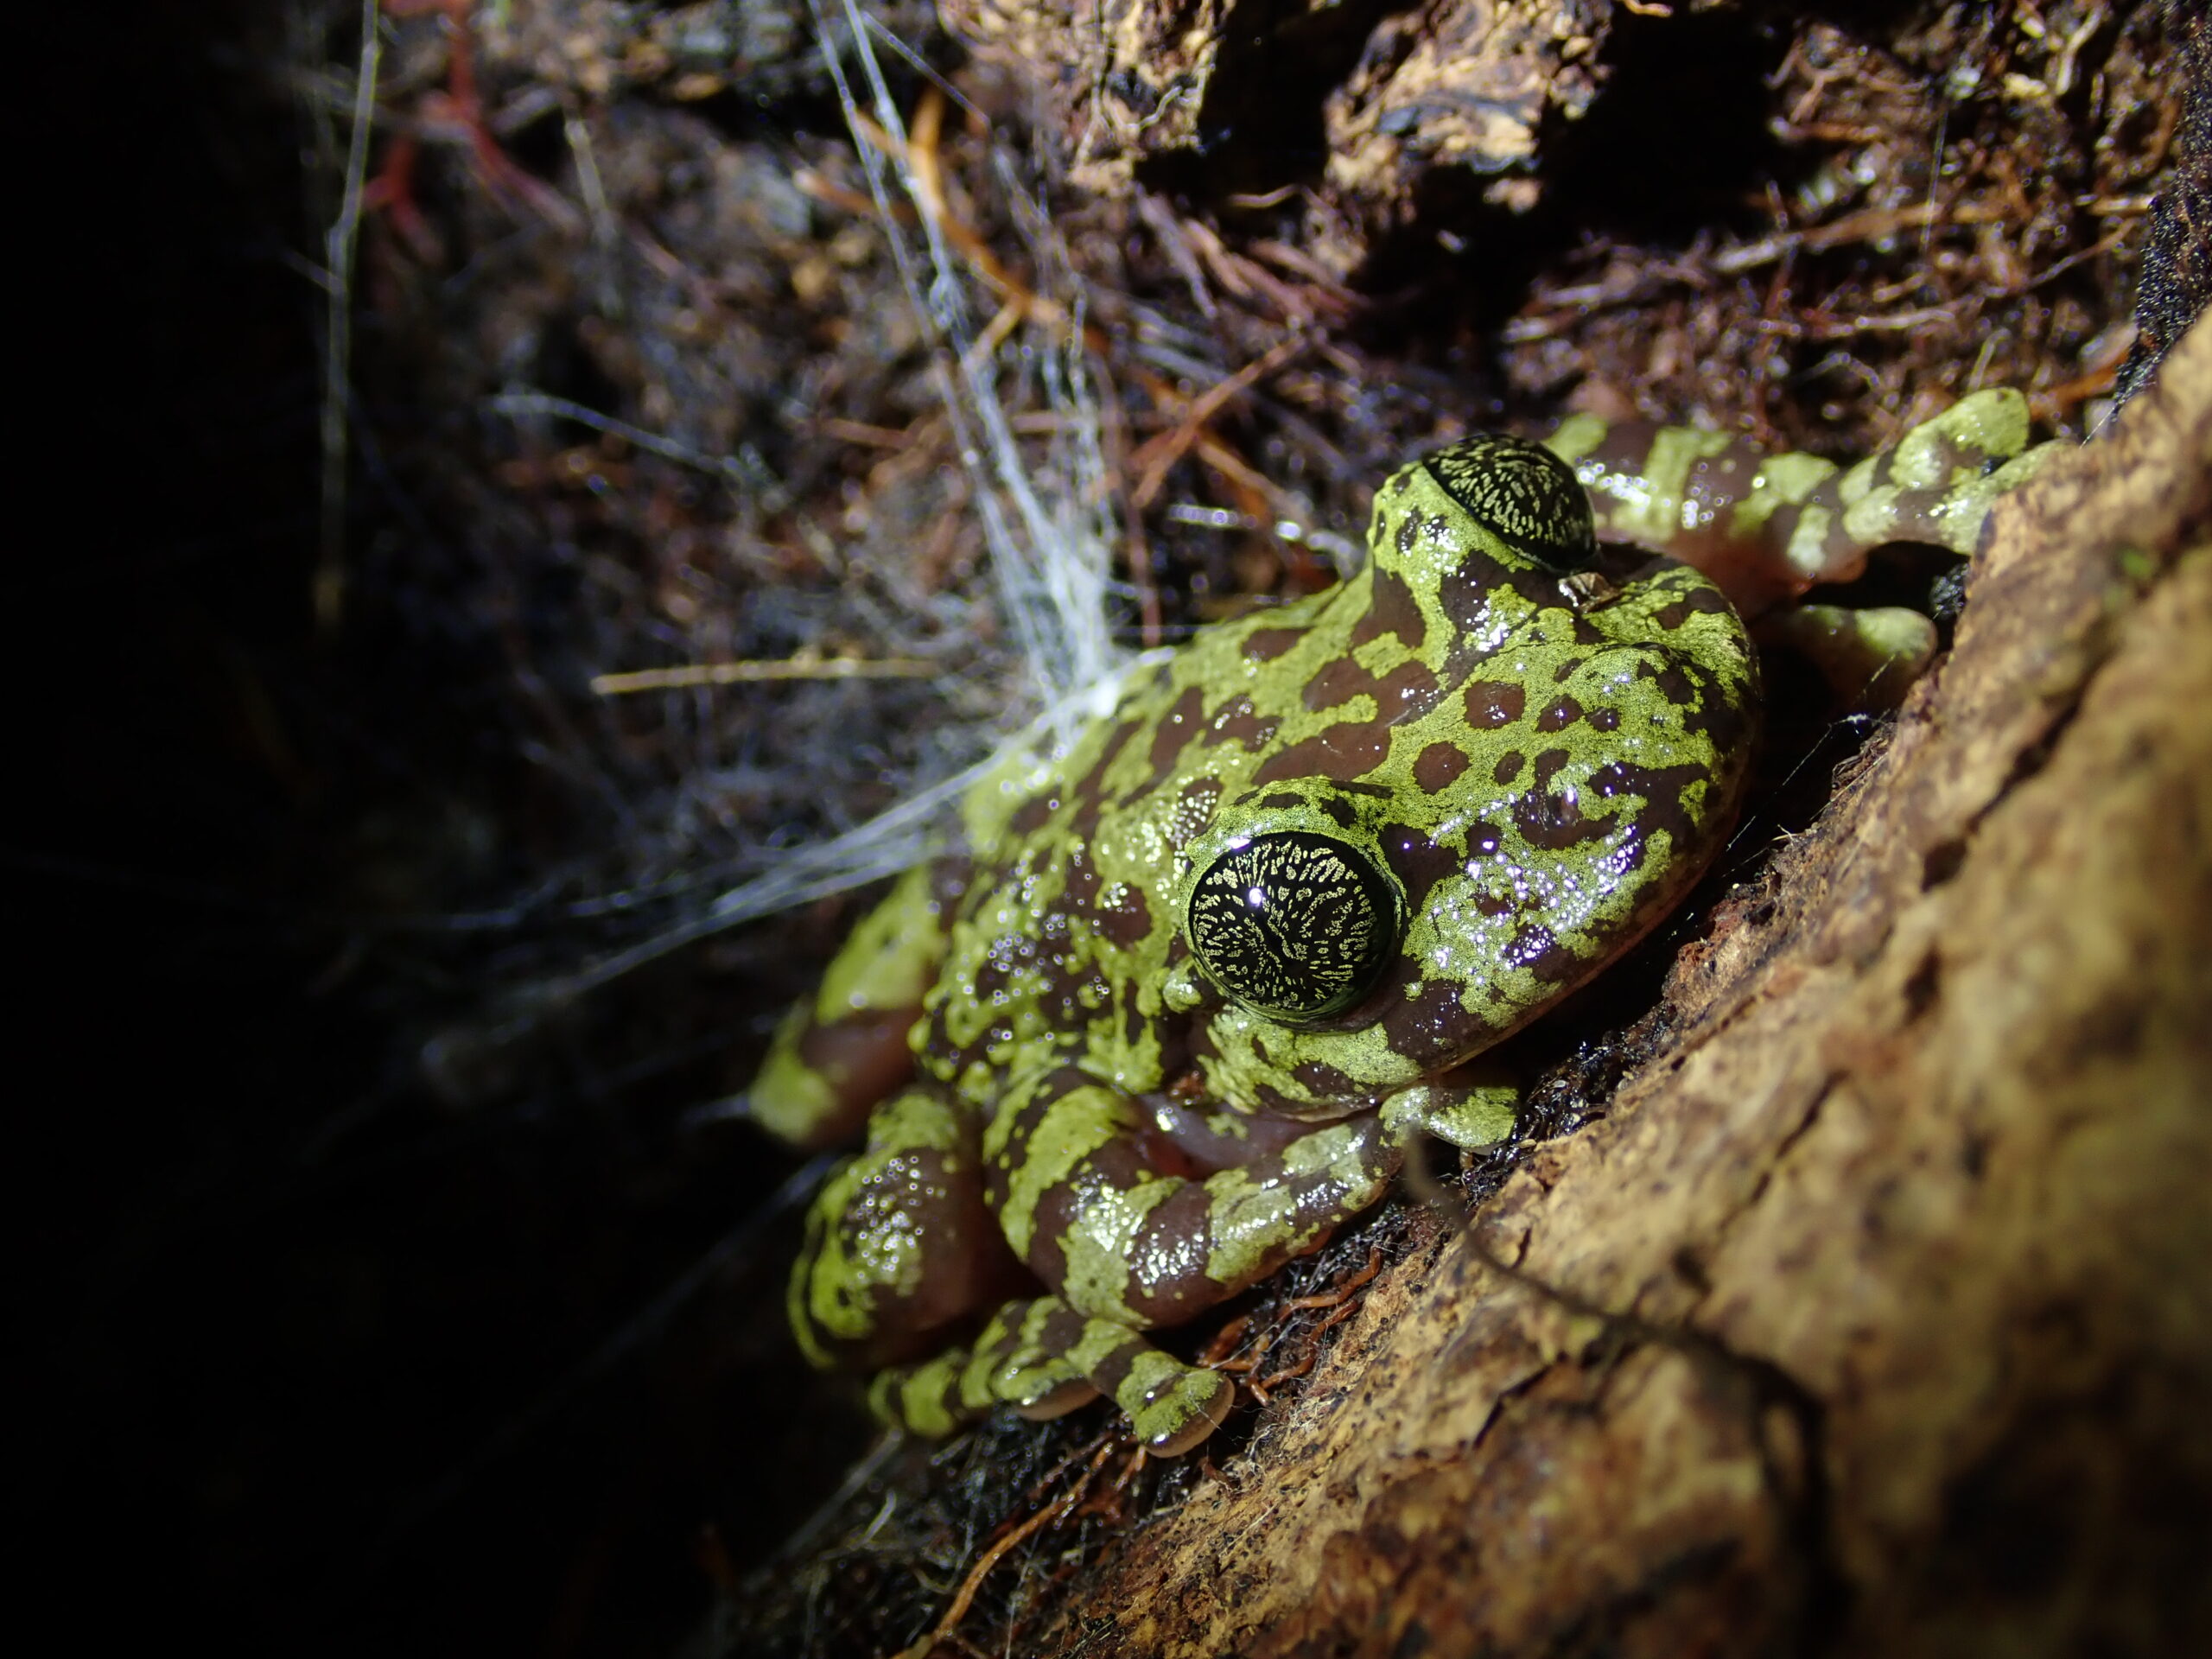 Let’s talk about the Table Mountain ghost frog (Critically Endangered)